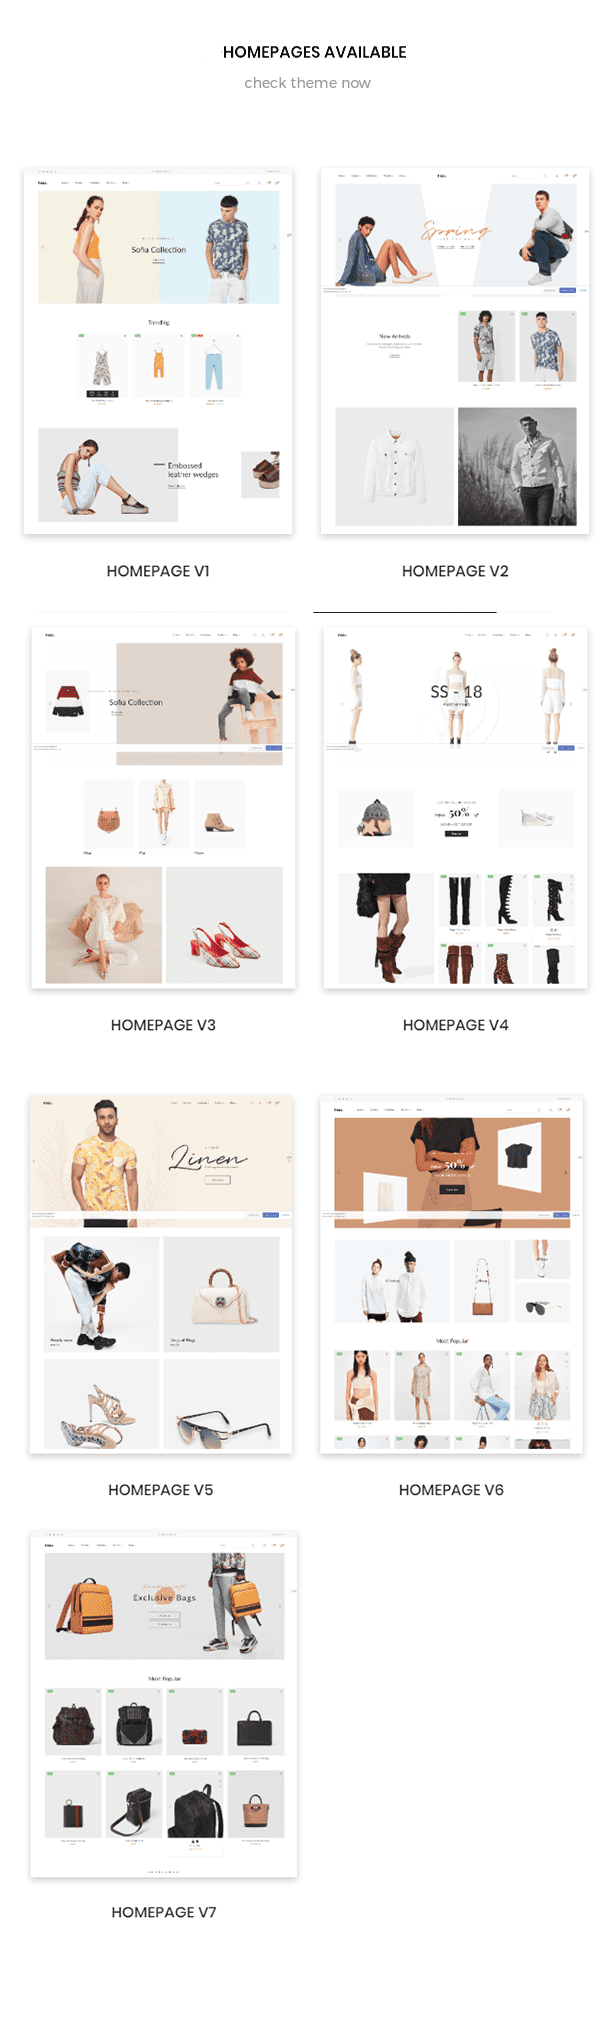 Homepages available of Minimal and creative shopify themes.